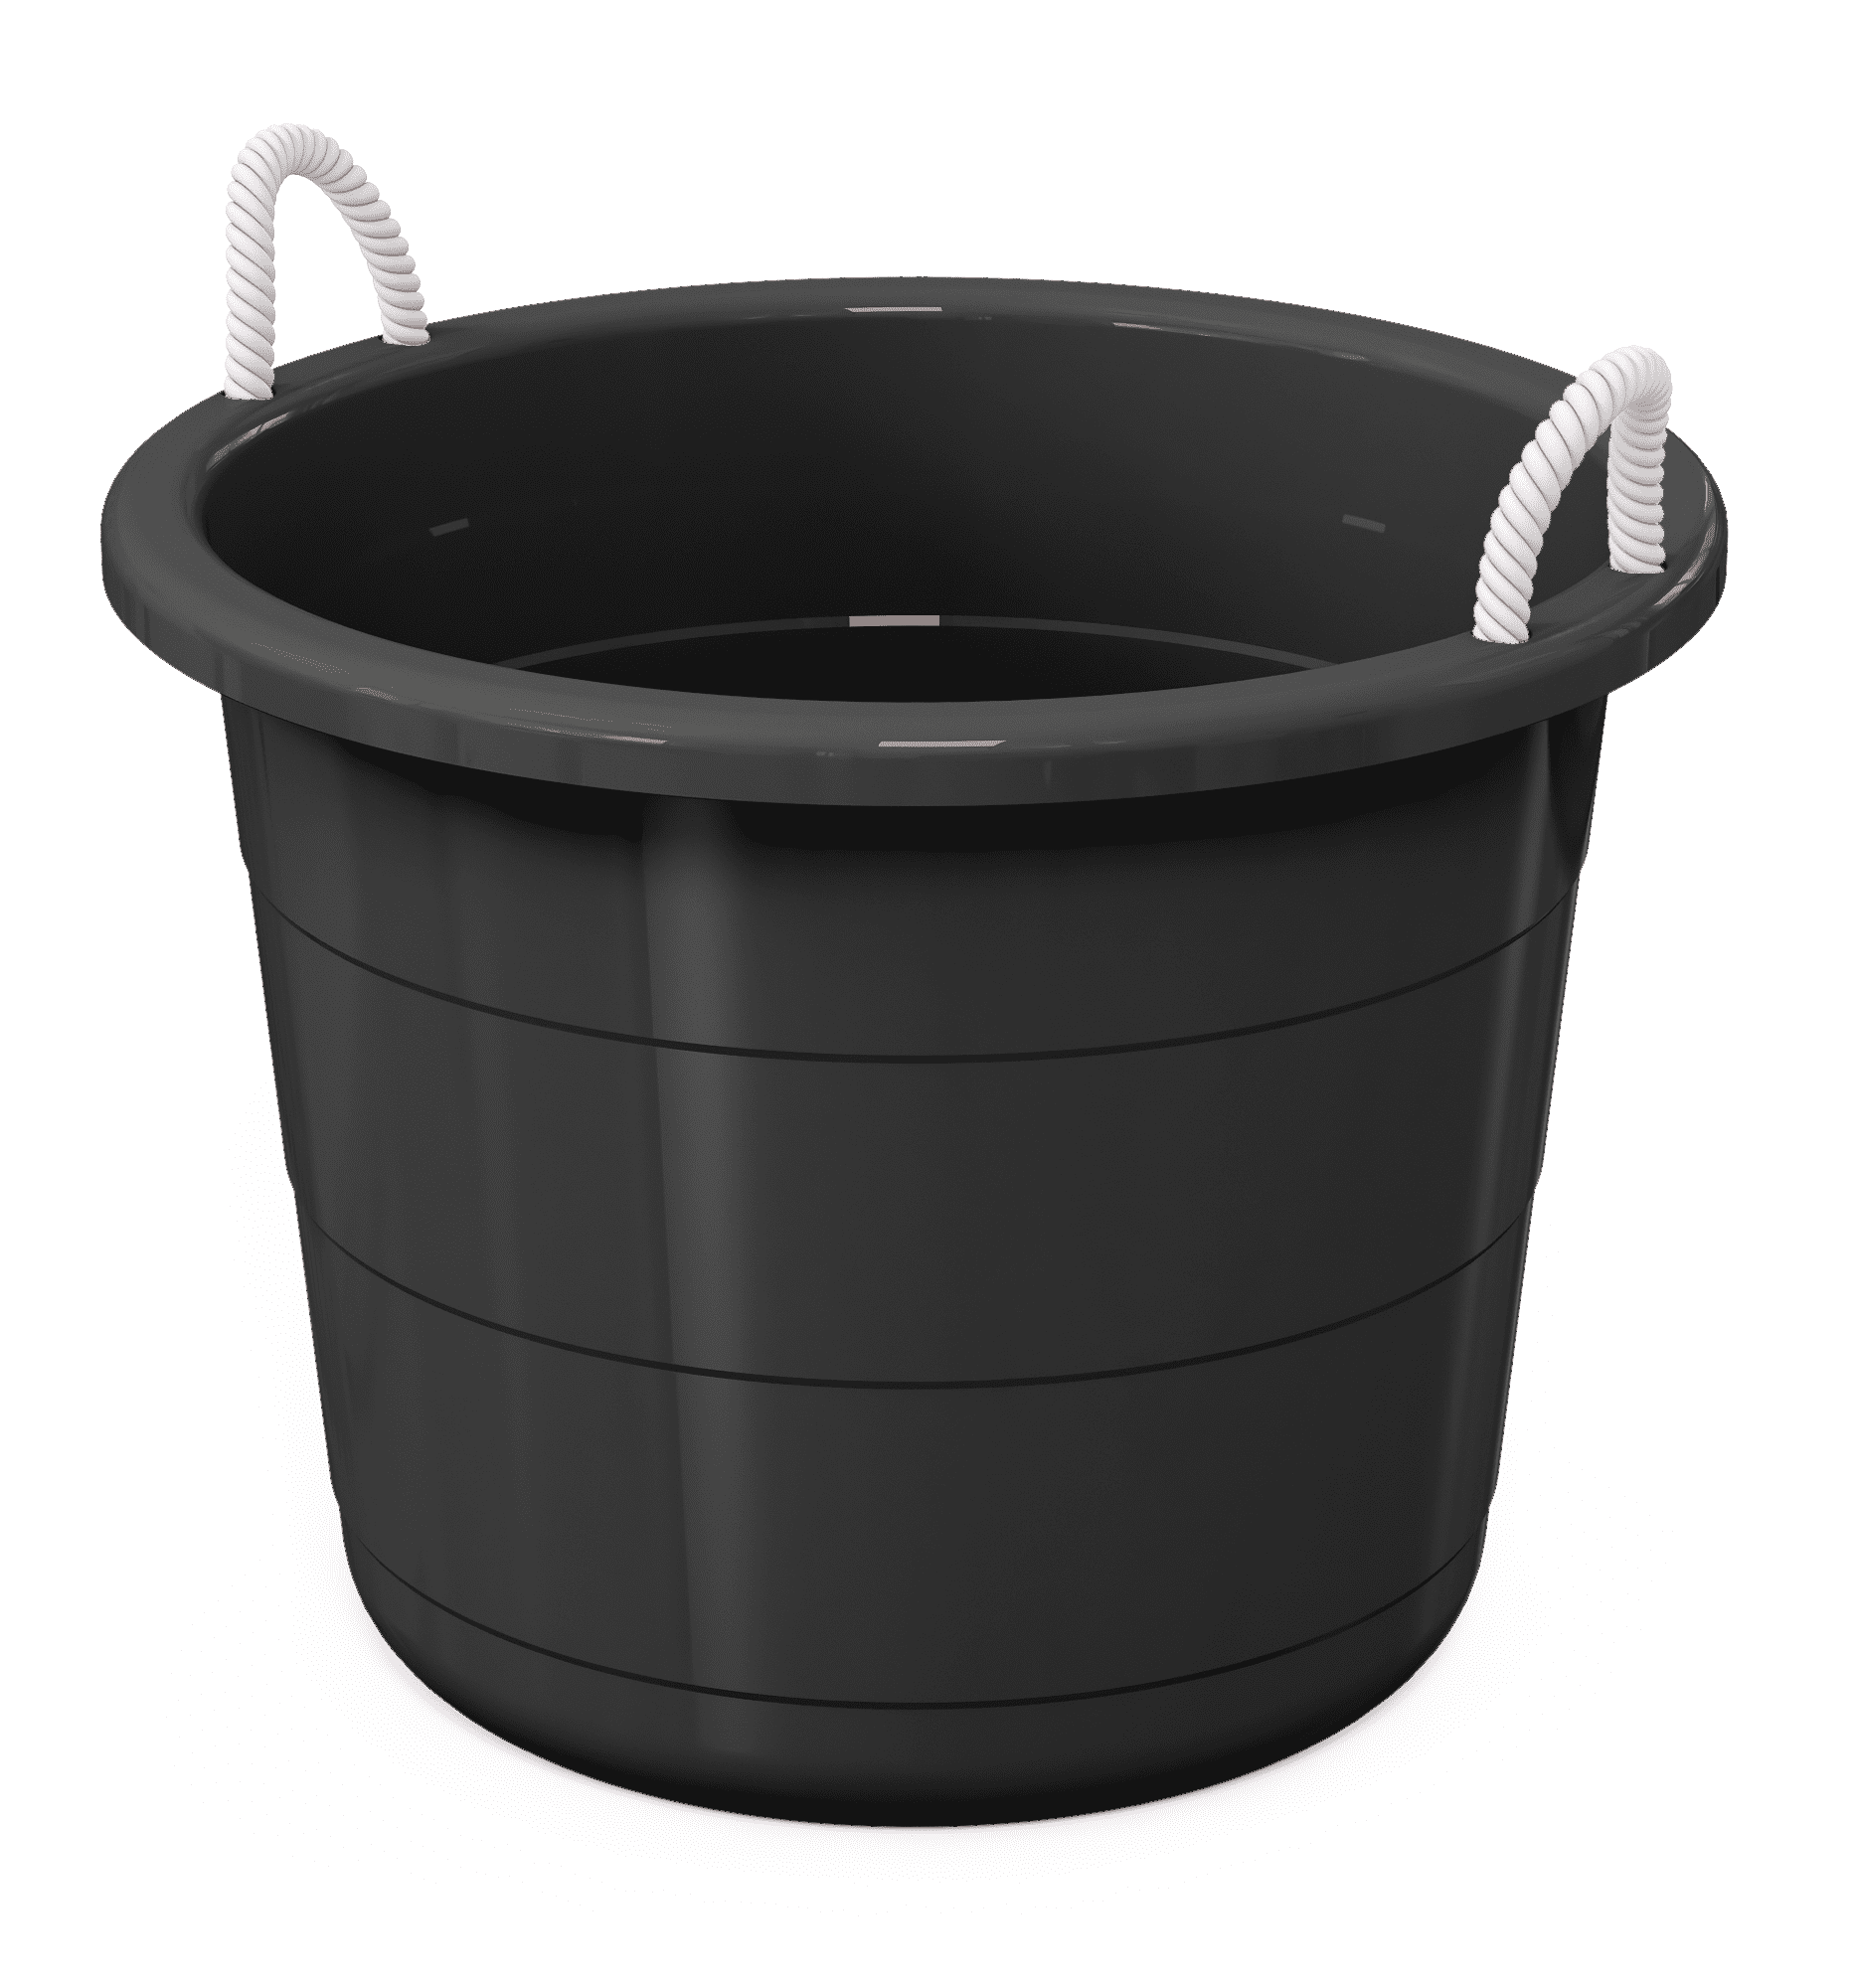 Mainstays Flexible Tub with Rope Handles, Black